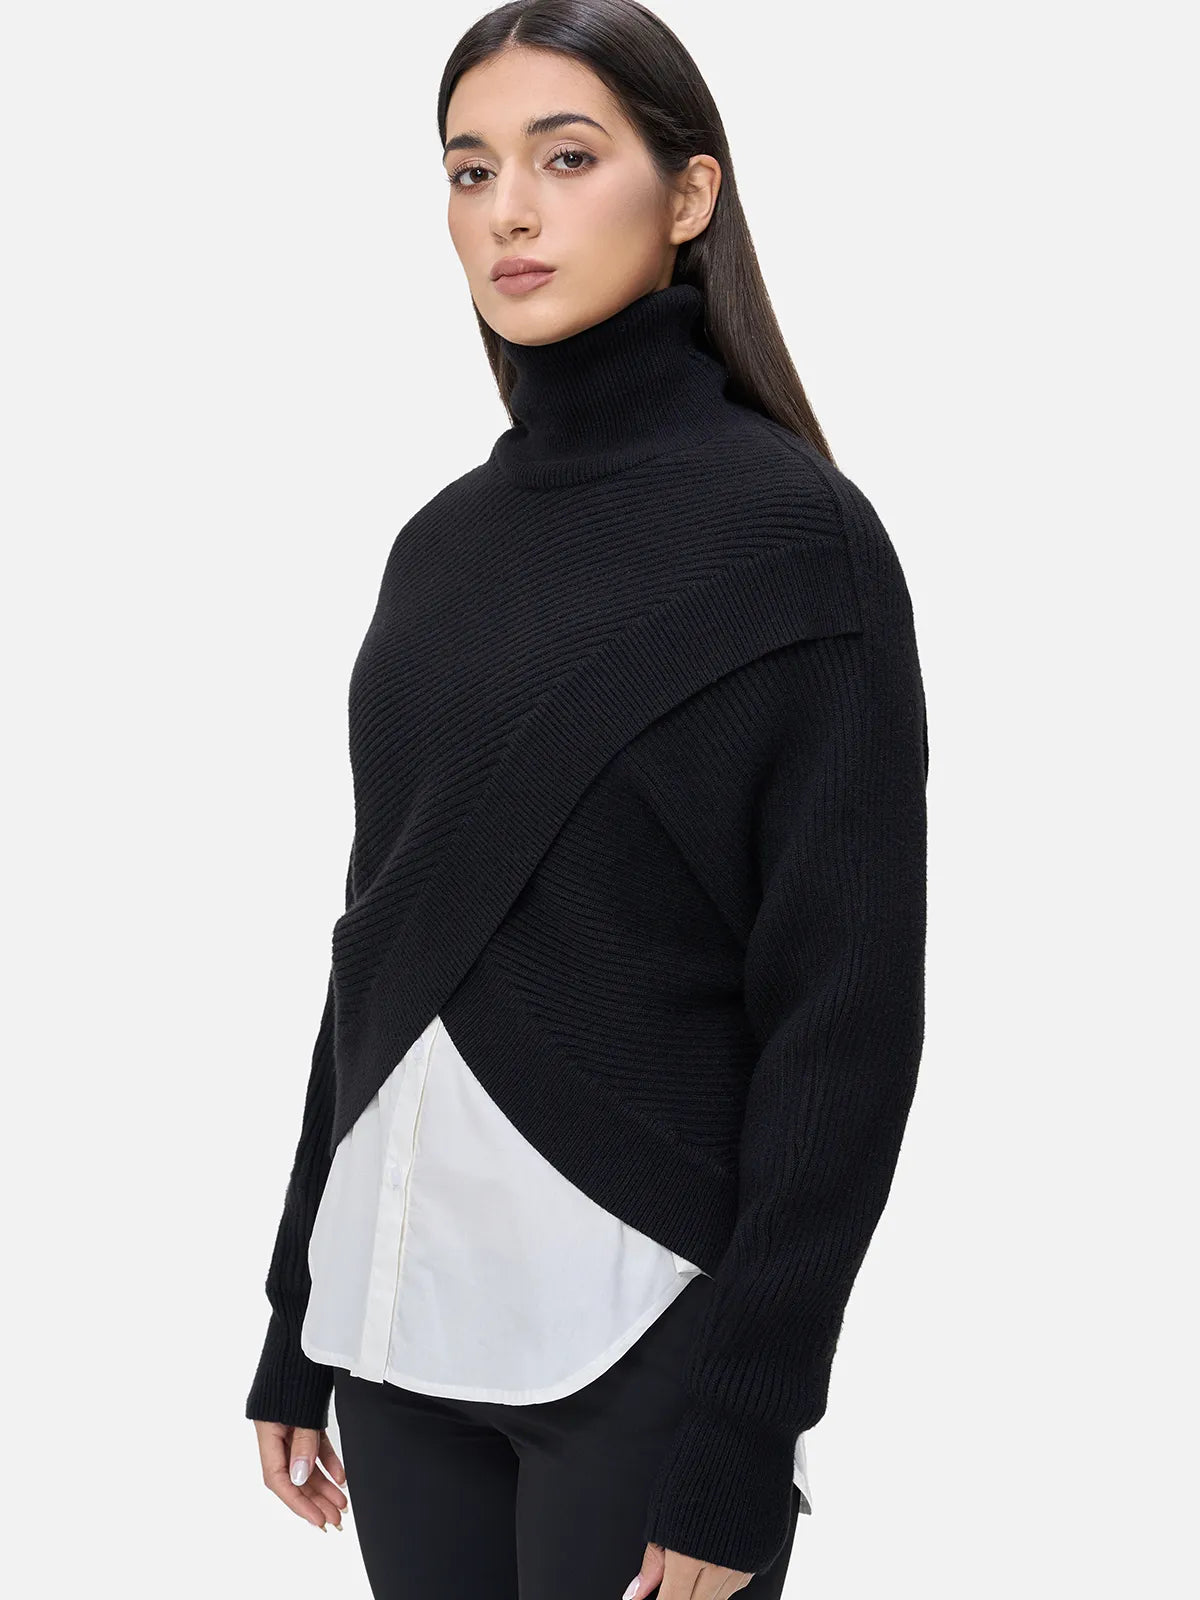 High Collar Color Block Two-Piece Sweater